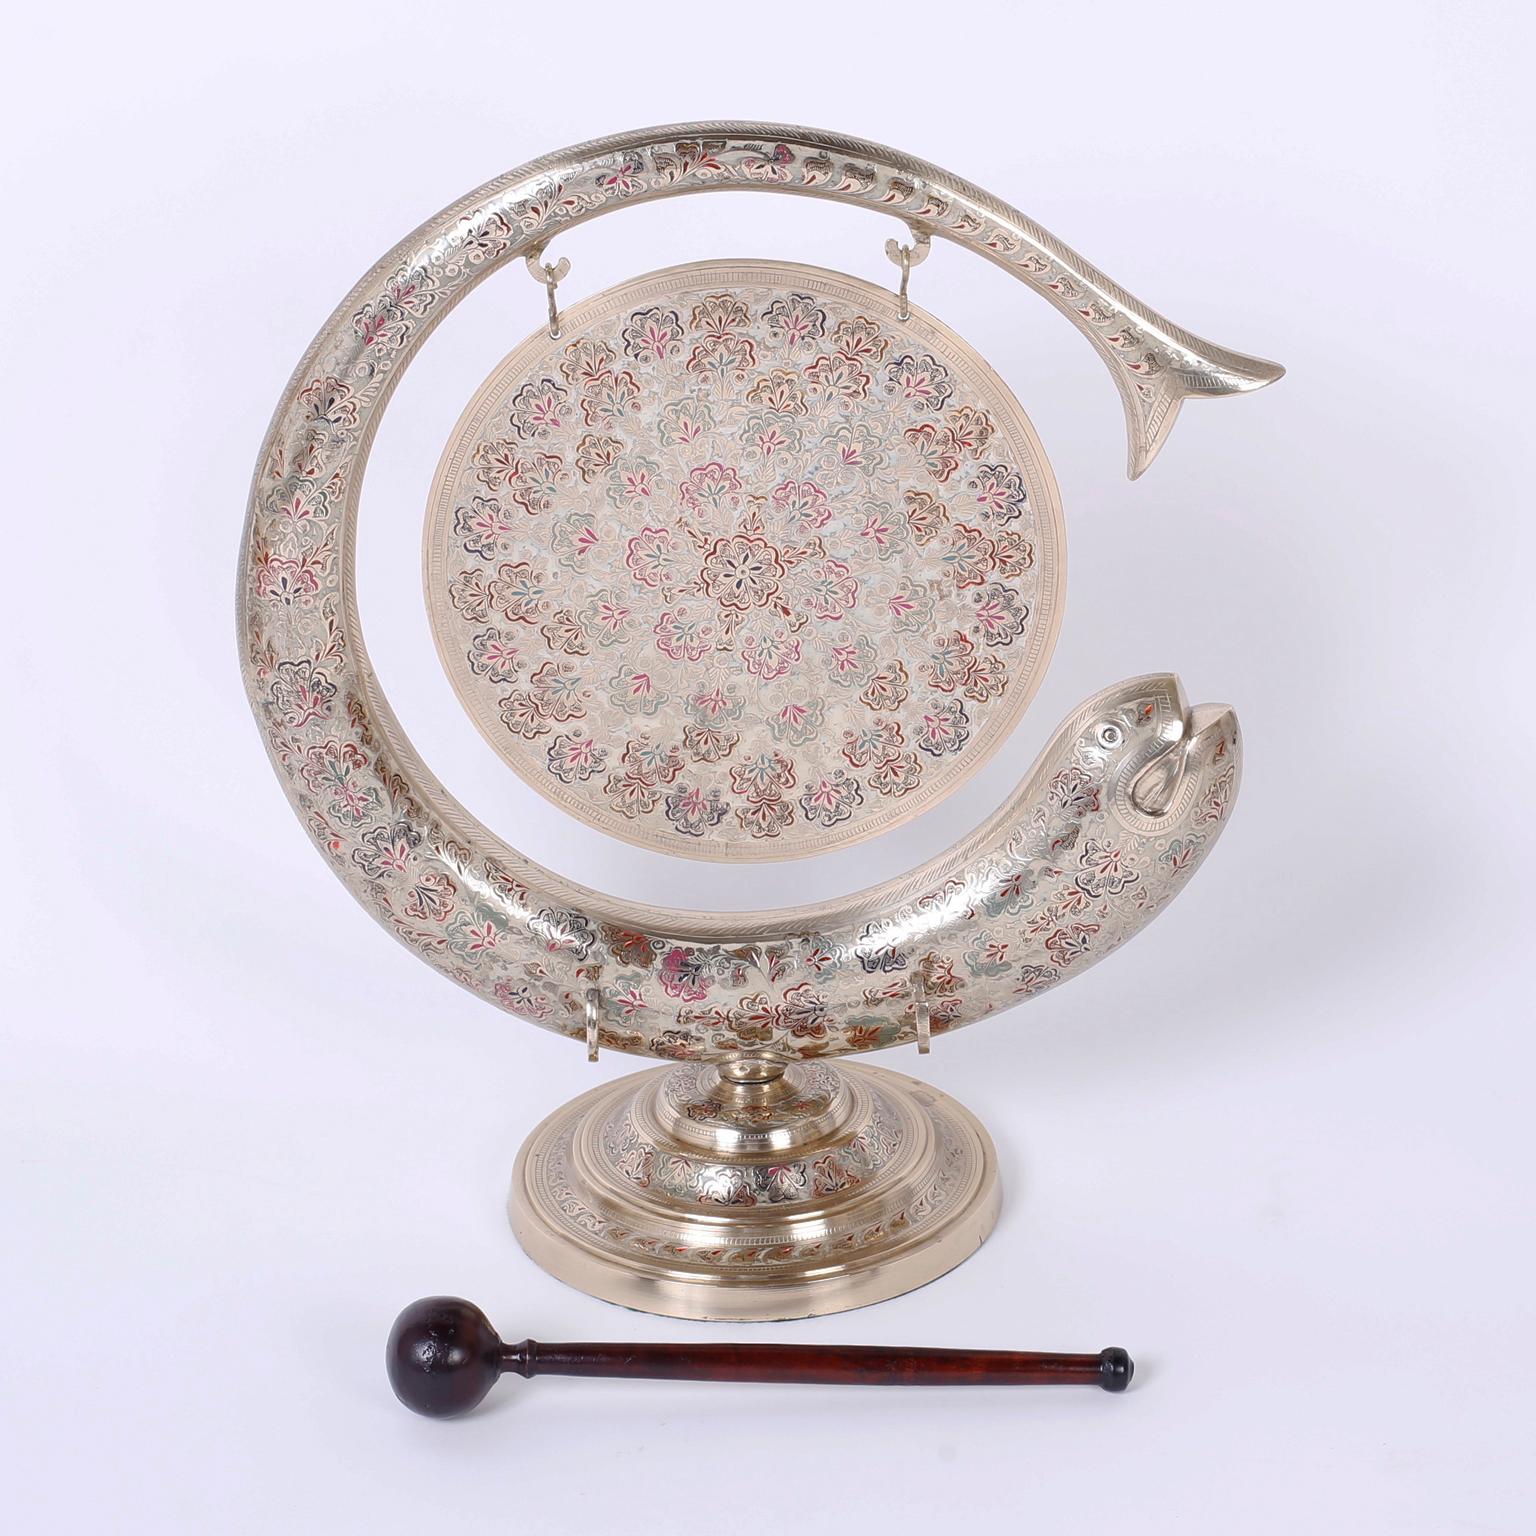 Vintage Anglo Indian dinner gong with a wooden mallet, crafted in brass with lovely enamel paintings on hand engraved floral designs over an inspired fish motif set on a Classic turned stand.
 